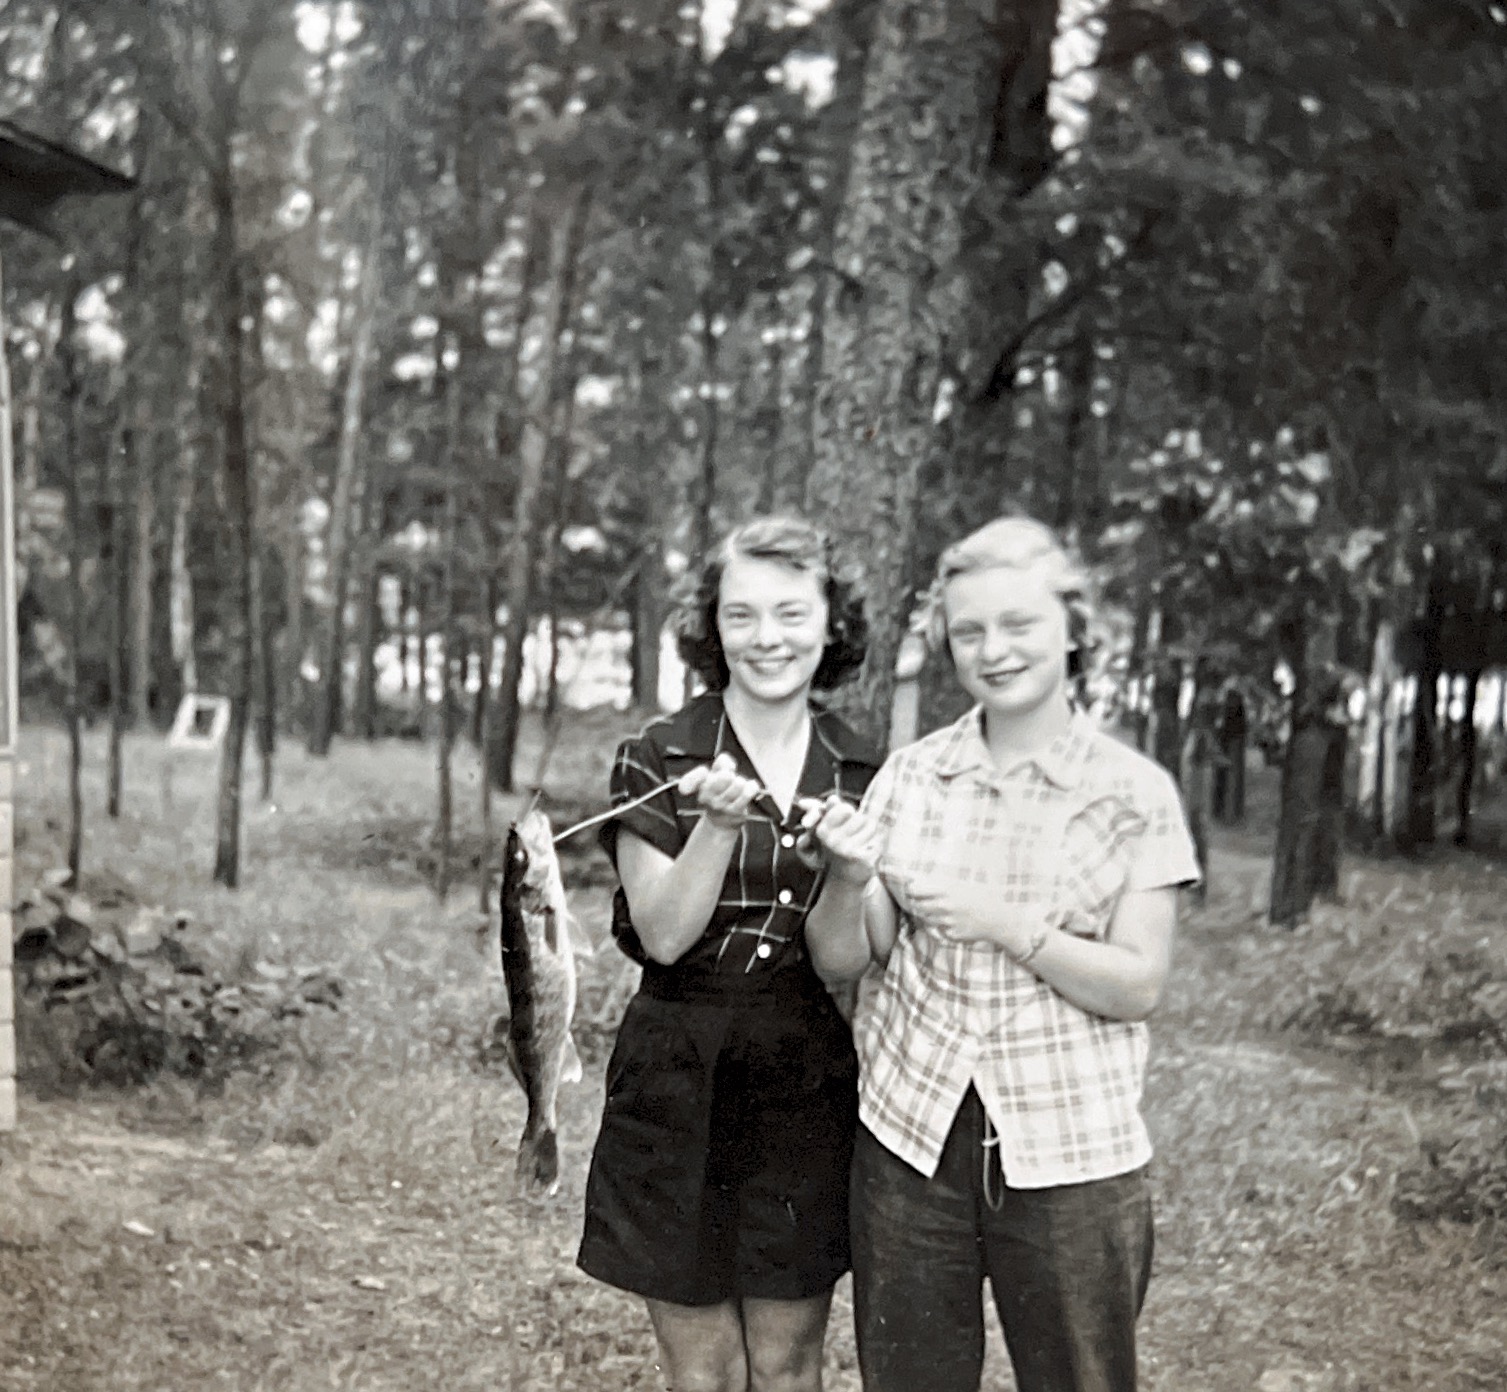 Sisters in 1950 Minnesota with fresh catch